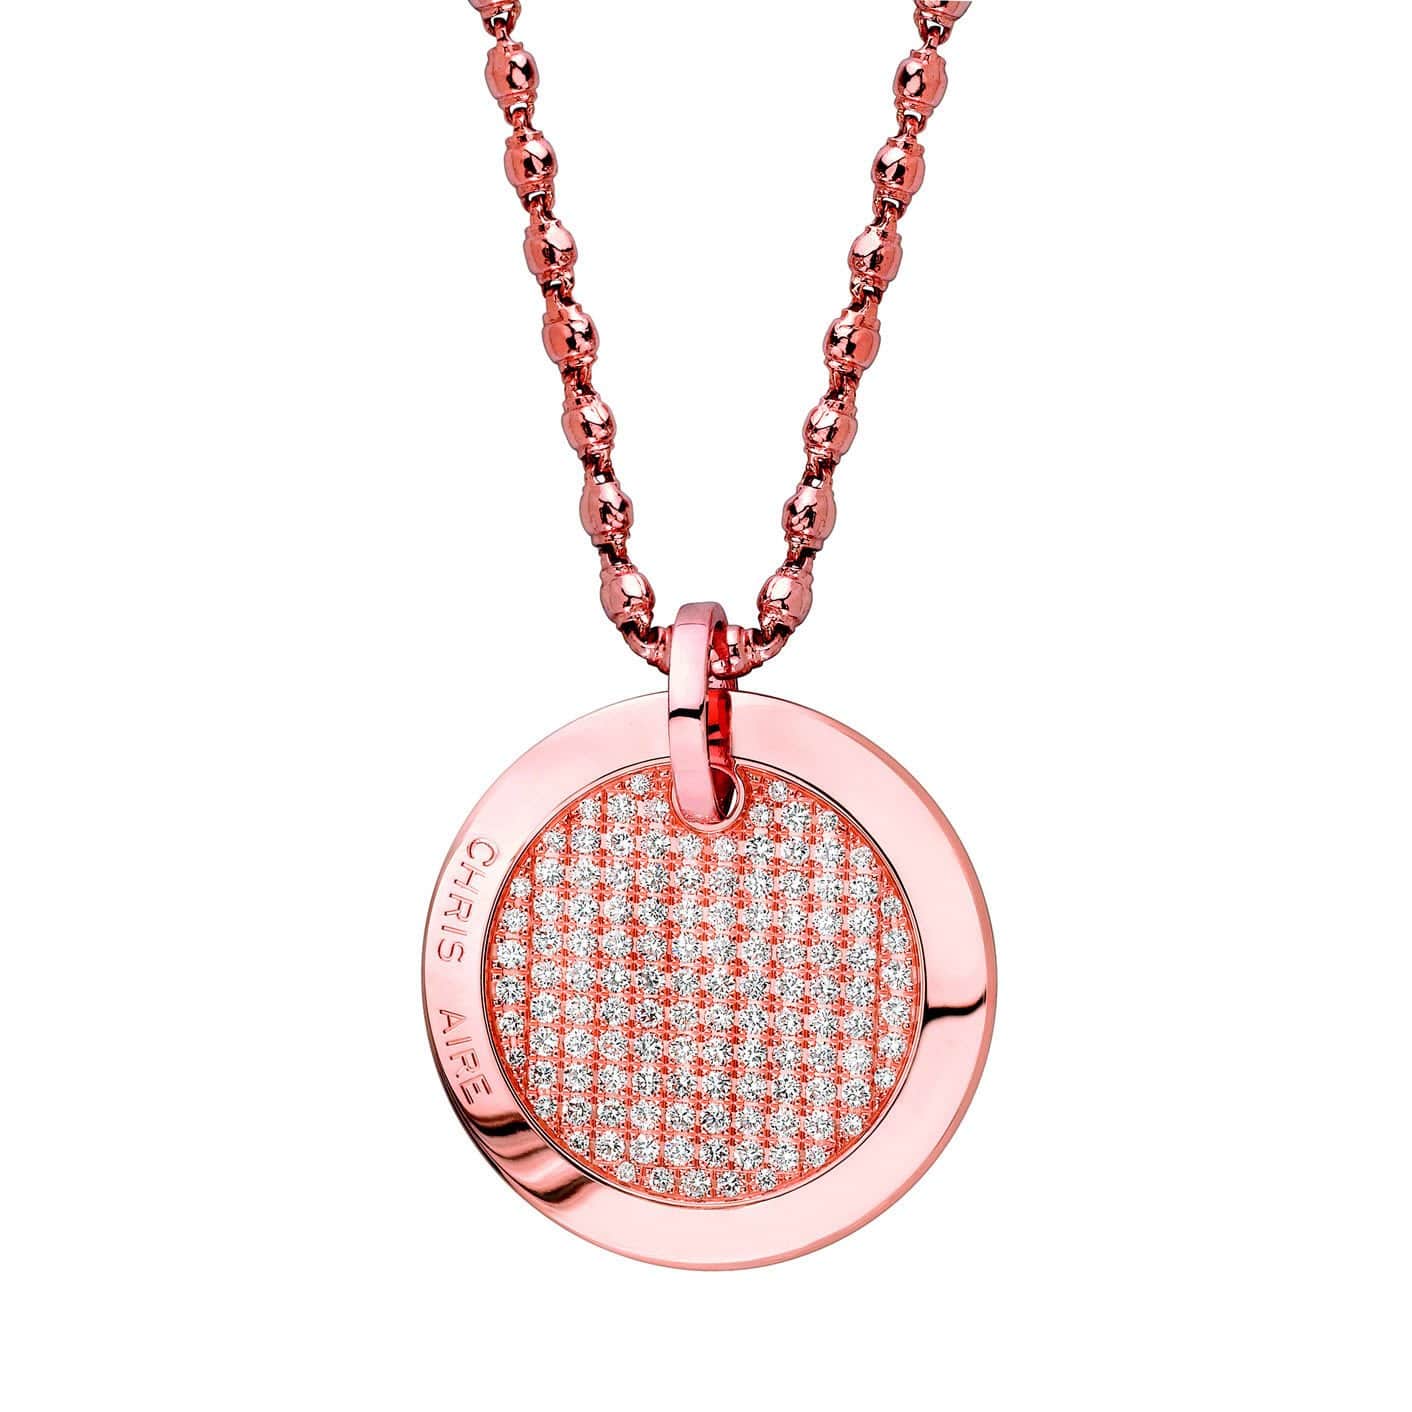 DIAMOND NECKLACE - ETERNITY TAG - Chris Aire Fine Jewelry & Timepieces